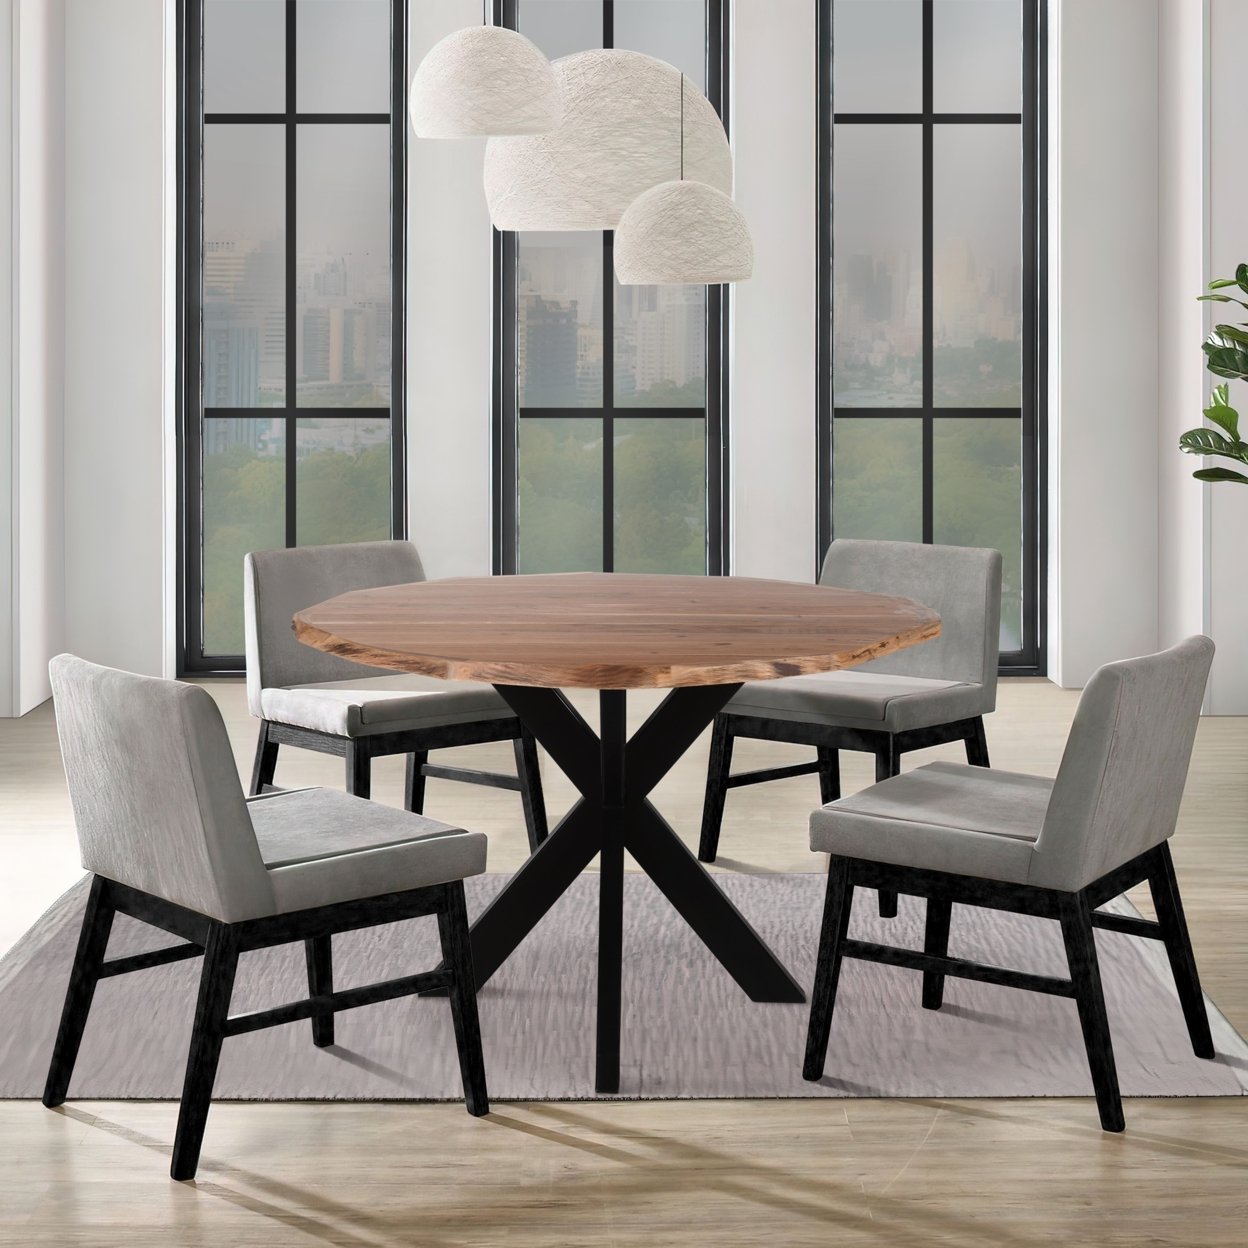 41 Inch Handcrafted Live Edge Round Dining Table With A Natural Brown Acacia Wood Top And Black Iron Legs- Saltoro Sherpi